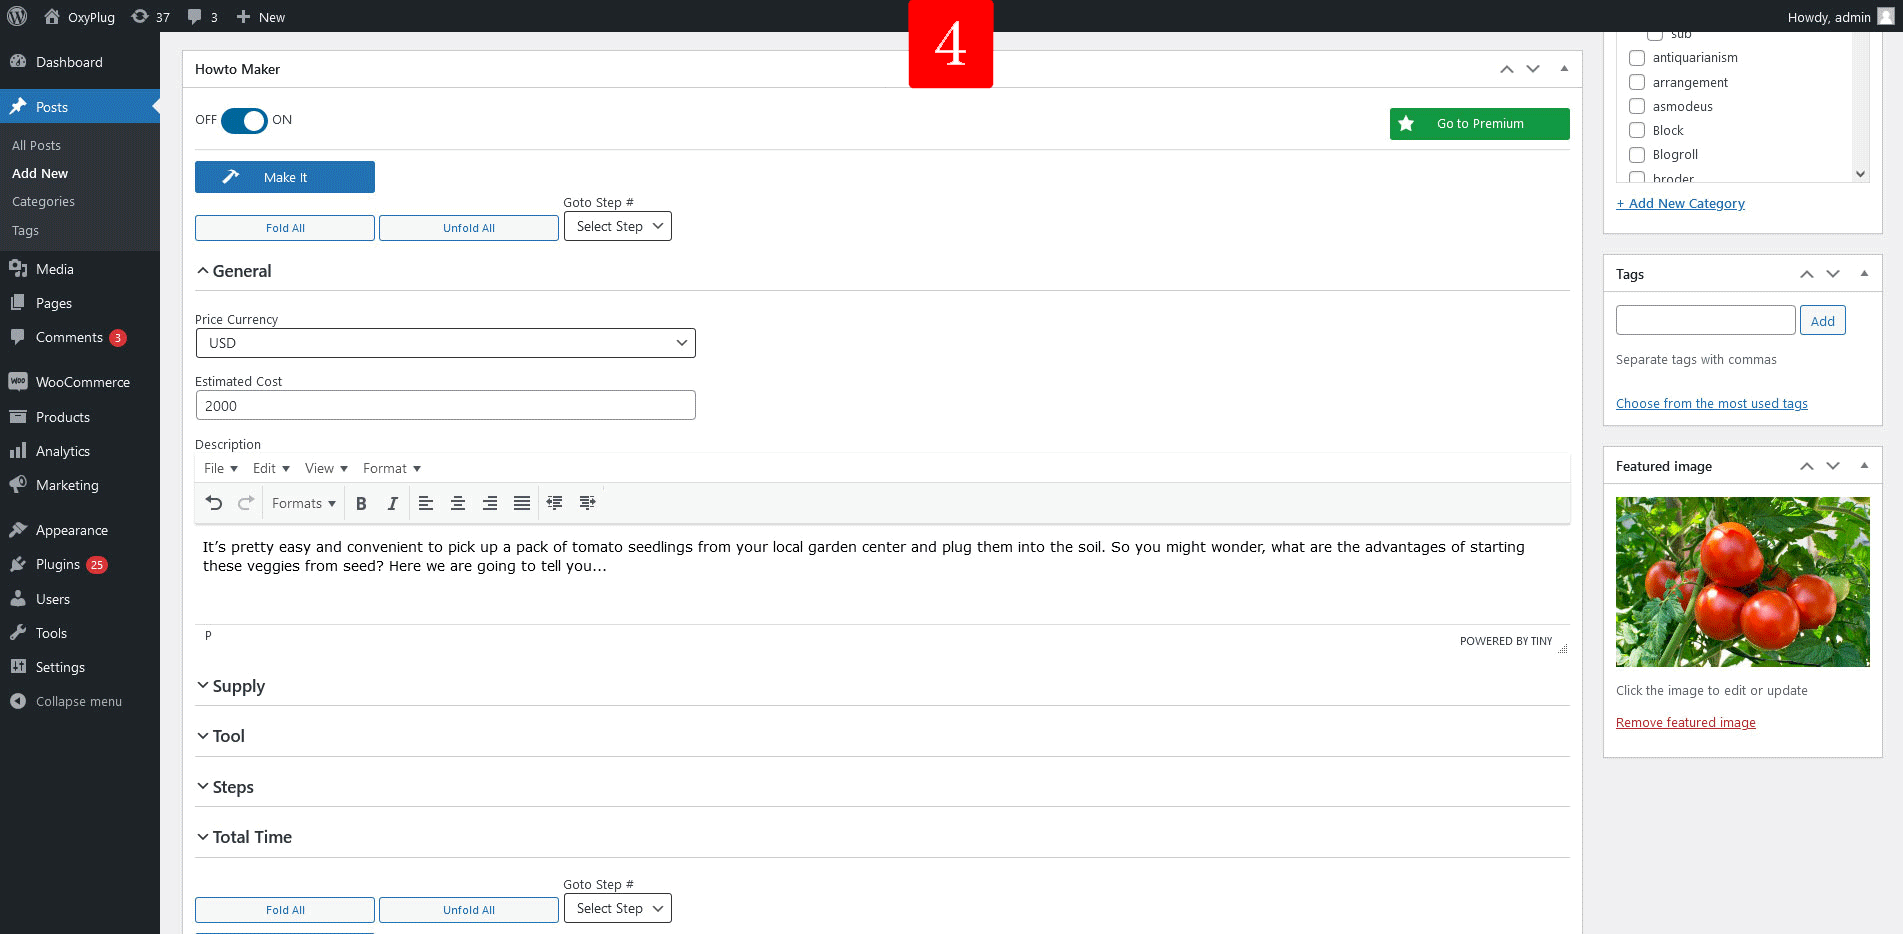 Admin - Howto Maker Next Step Directions